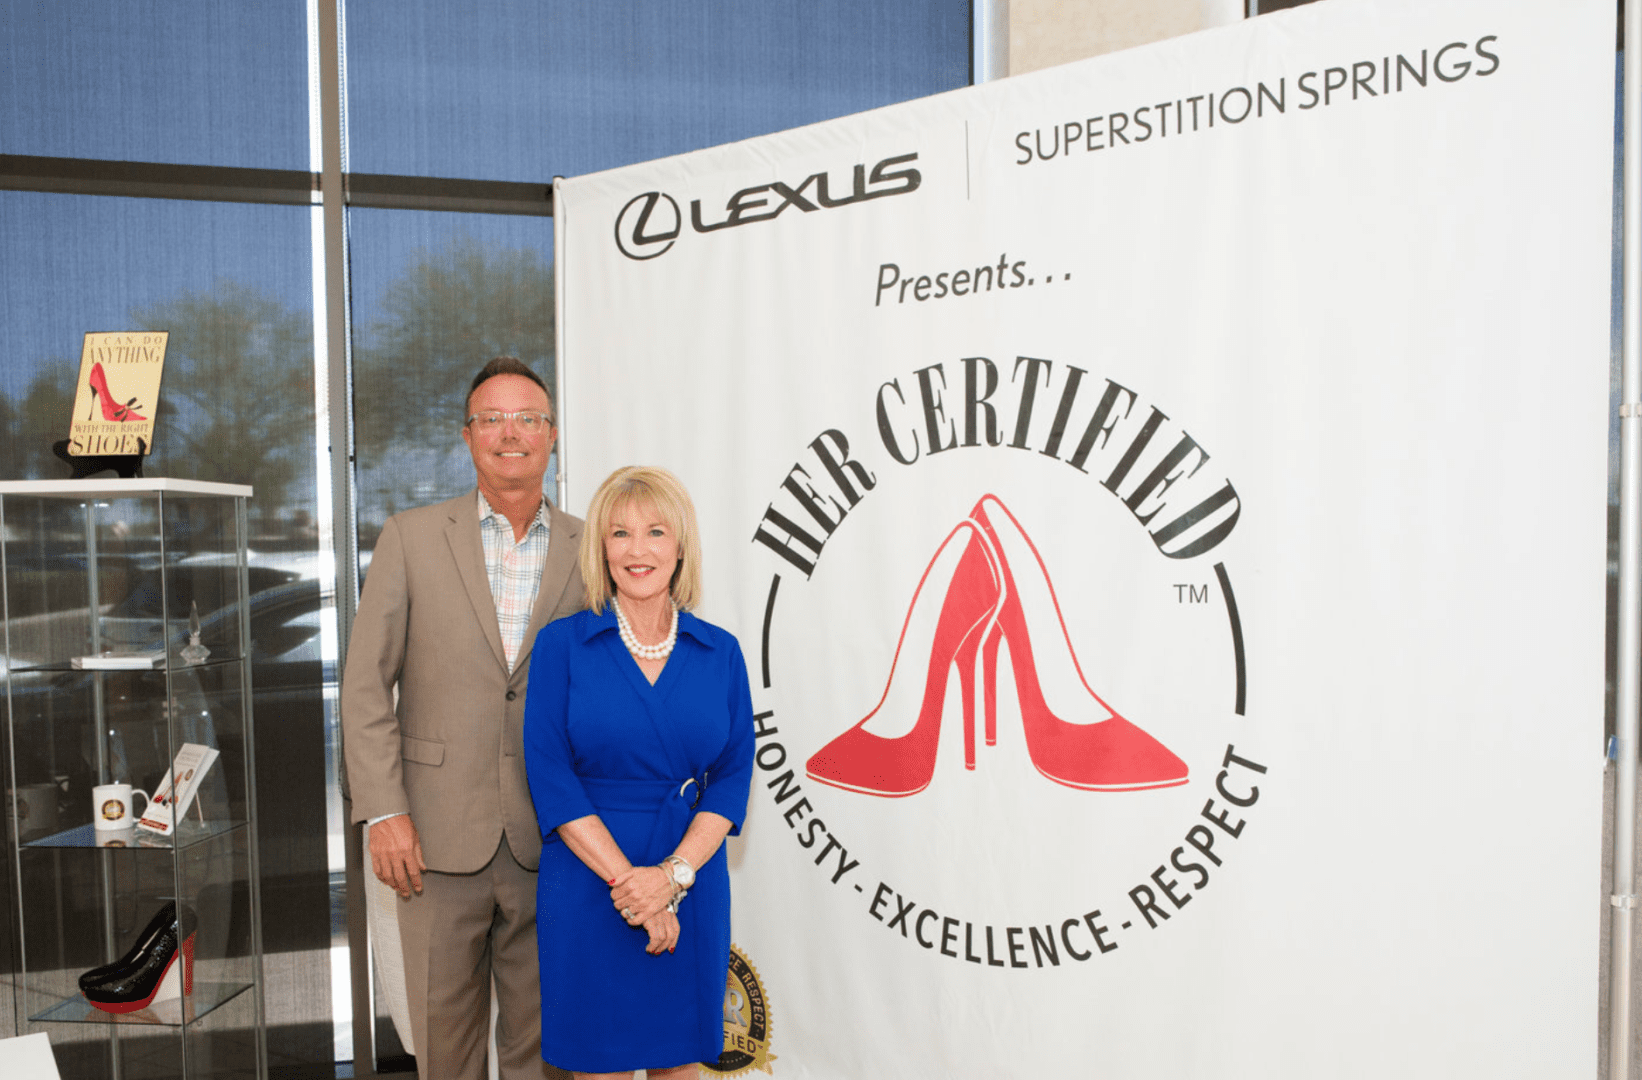 Two individuals, a man and a woman, standing in front of a promotional banner that reads "lexus superstition springs presents: mr. certified" with a red high heels logo.